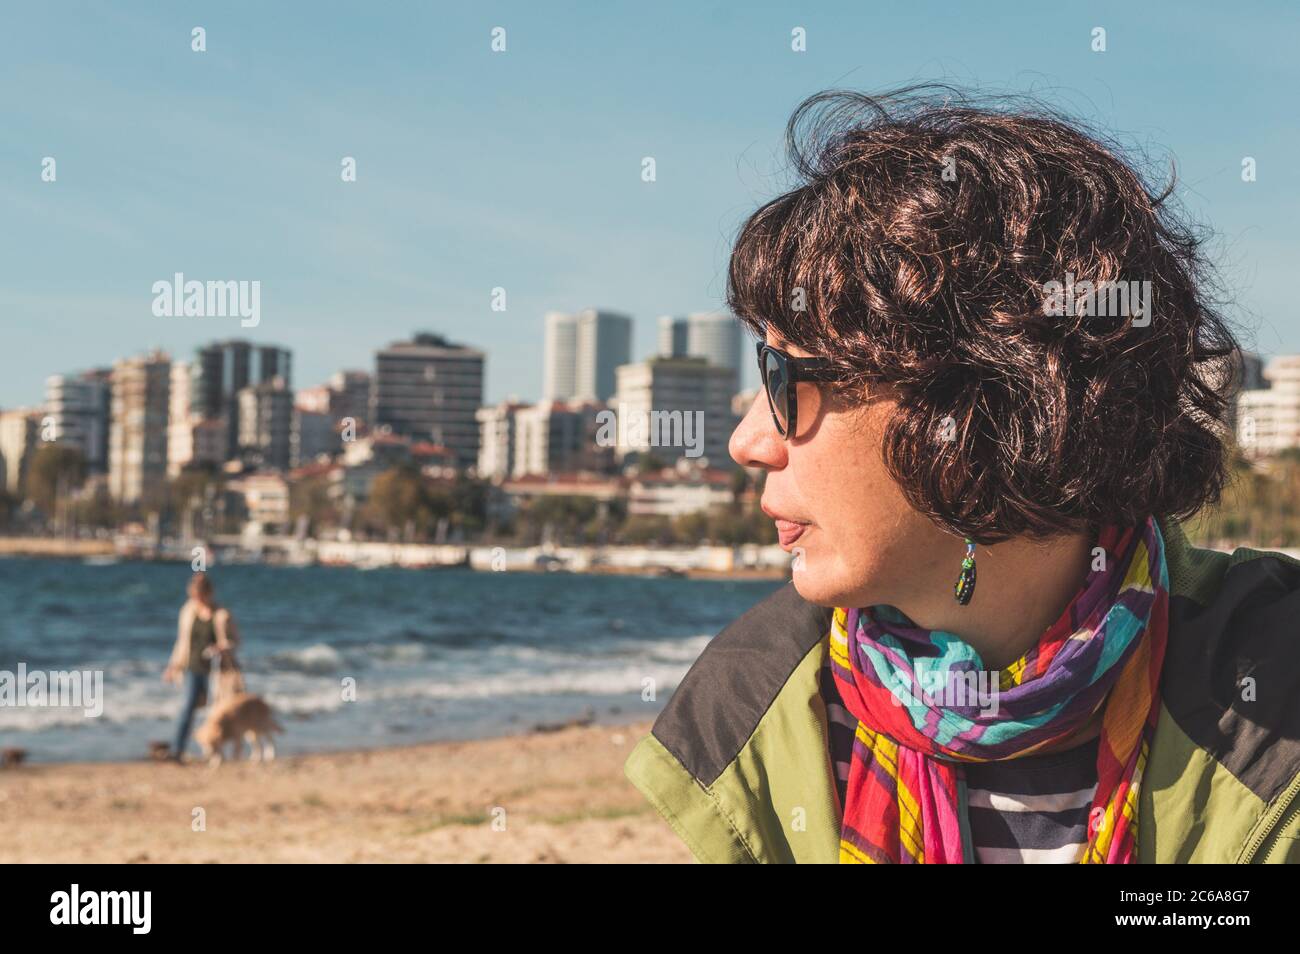 Profile of a brunette woman with curly hair, colorful clothing, and sunglasses, sitting on a sandy beach and looking away. Urban lifestyle. Stock Photo